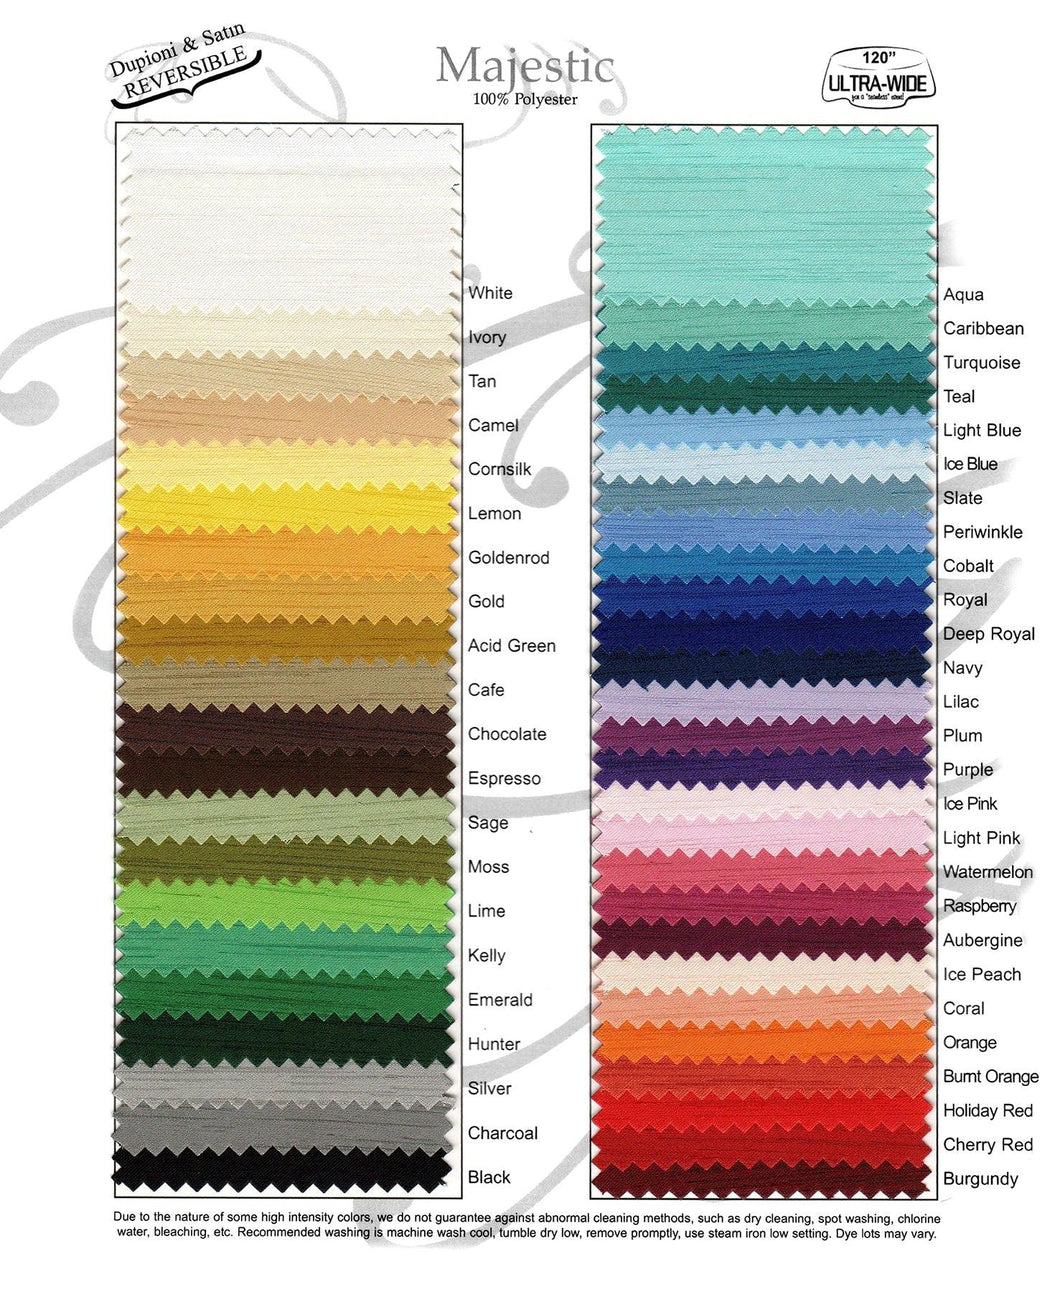 Our majestic fabric color and material swatch card with all 47 colors